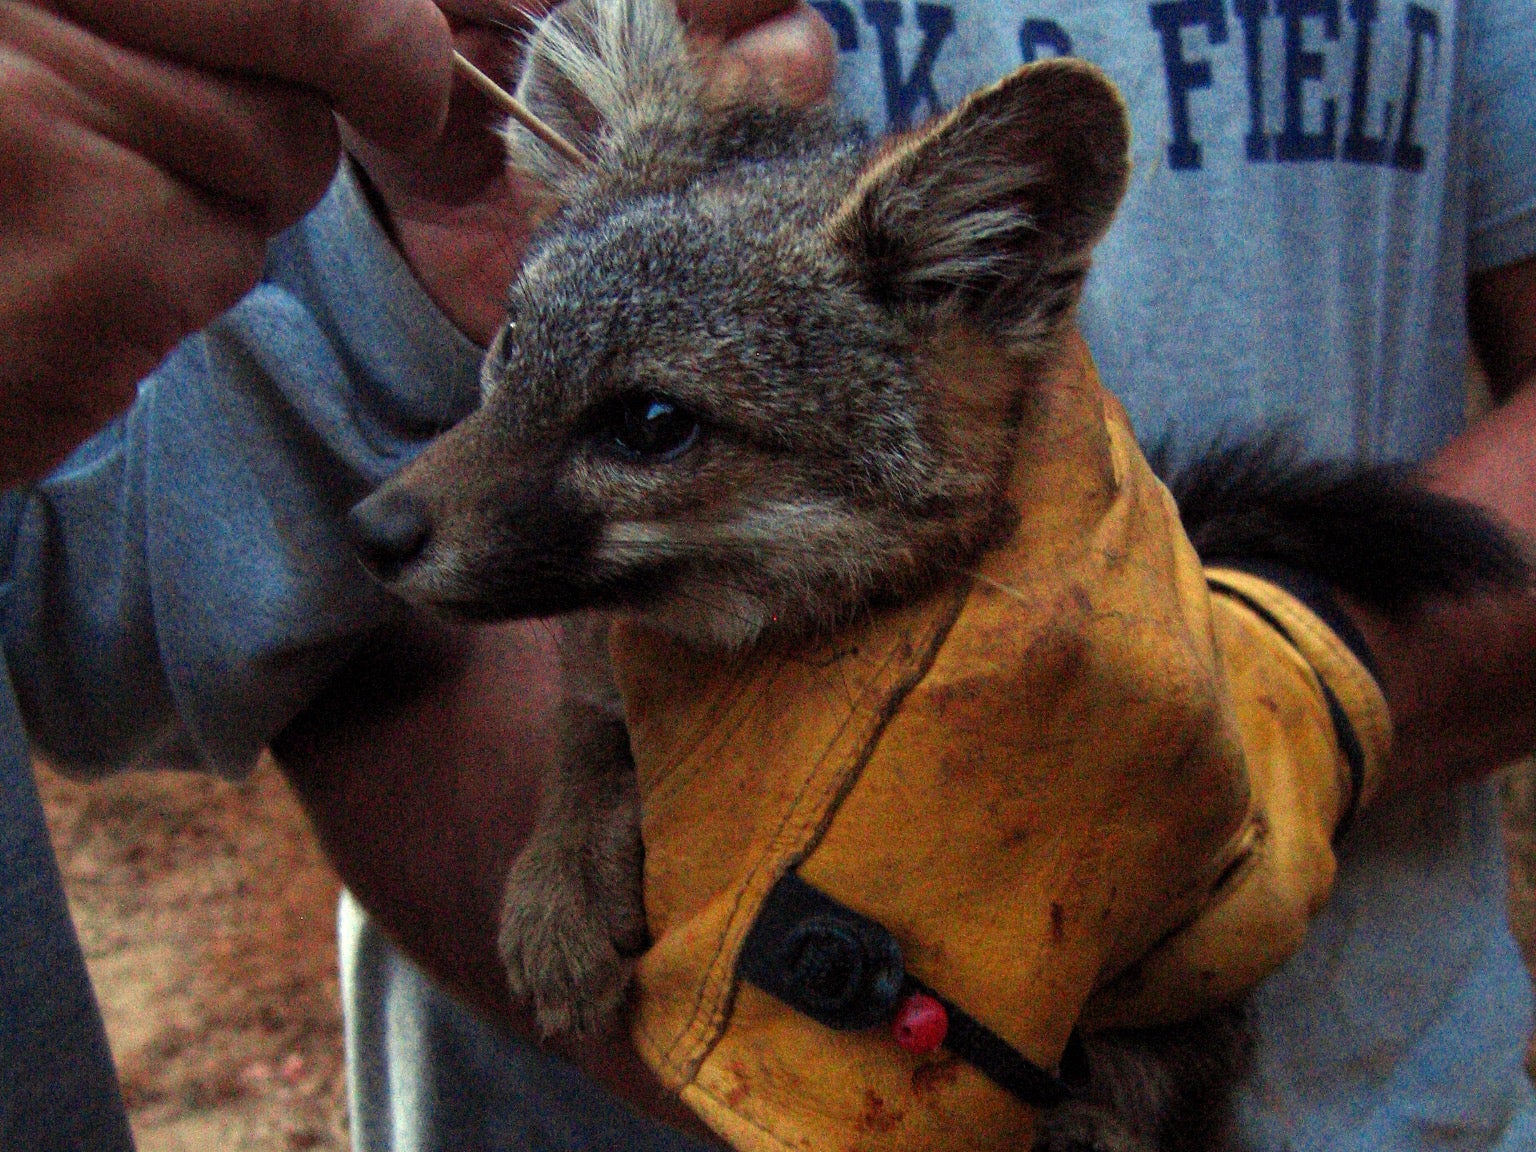 veterinarian swabs Channel Island fox for ear mites as person holds fox